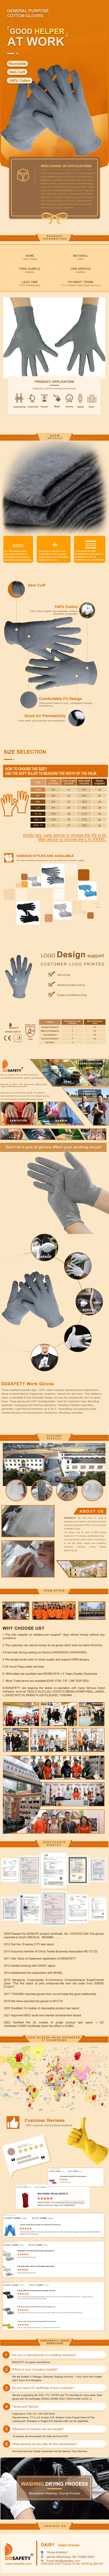 Stretchable Cloth Gloves, 180 Grams of Fabric - DCH207 Stretchable Cloth Gloves, 180 Grams of Fabric - DCH207 gloves,Stretchable Cloth Gloves